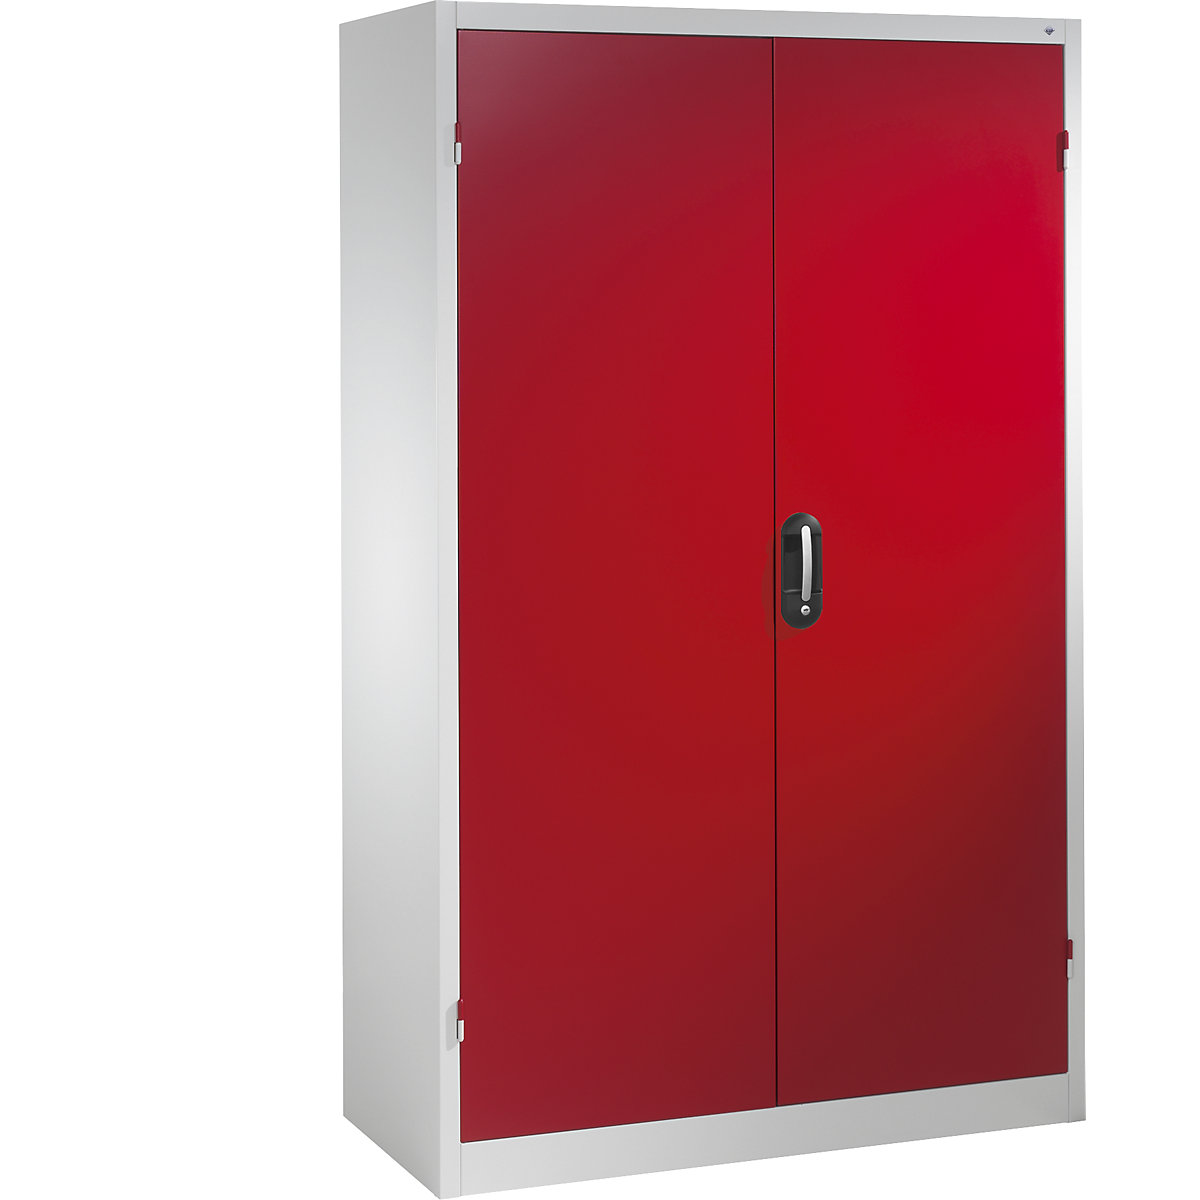 Large cupboard, extra high – C+P, HxW 1950 x 1200 mm, depth 500 mm, ruby red doors-8